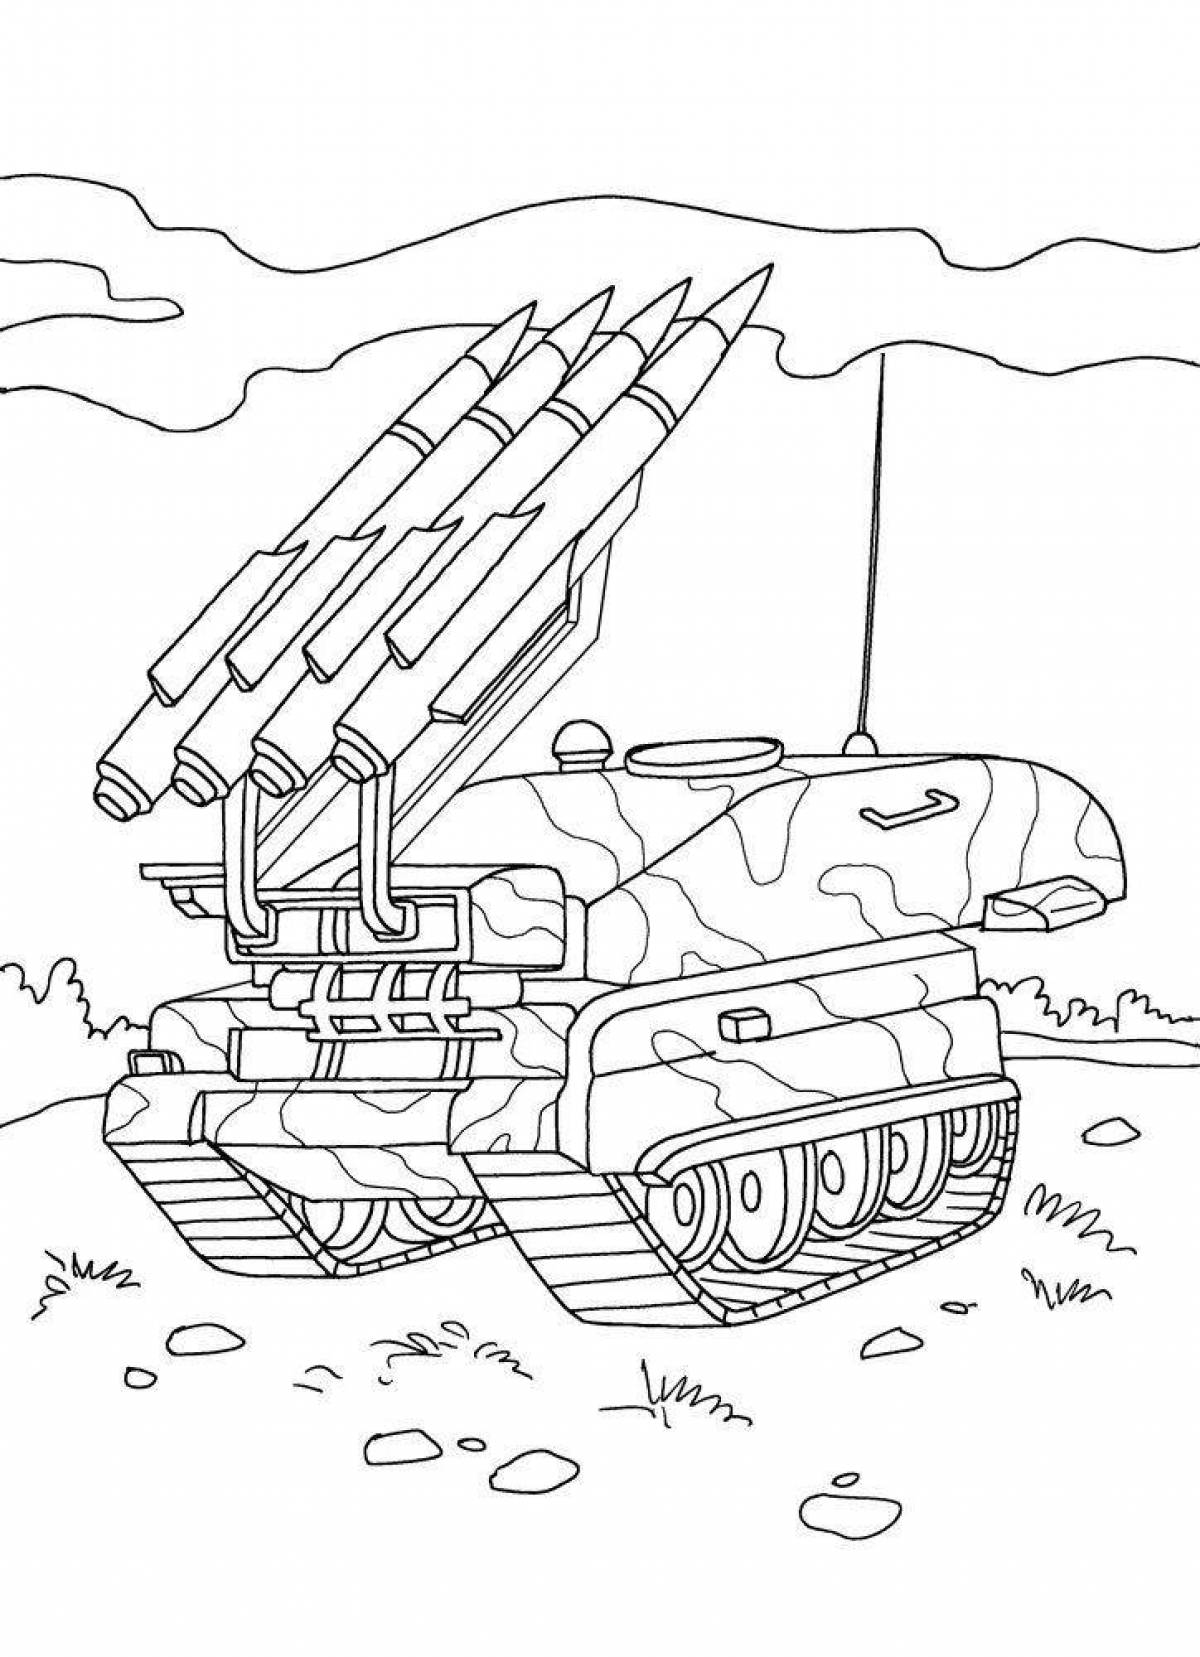 Majestic Russian army coloring book